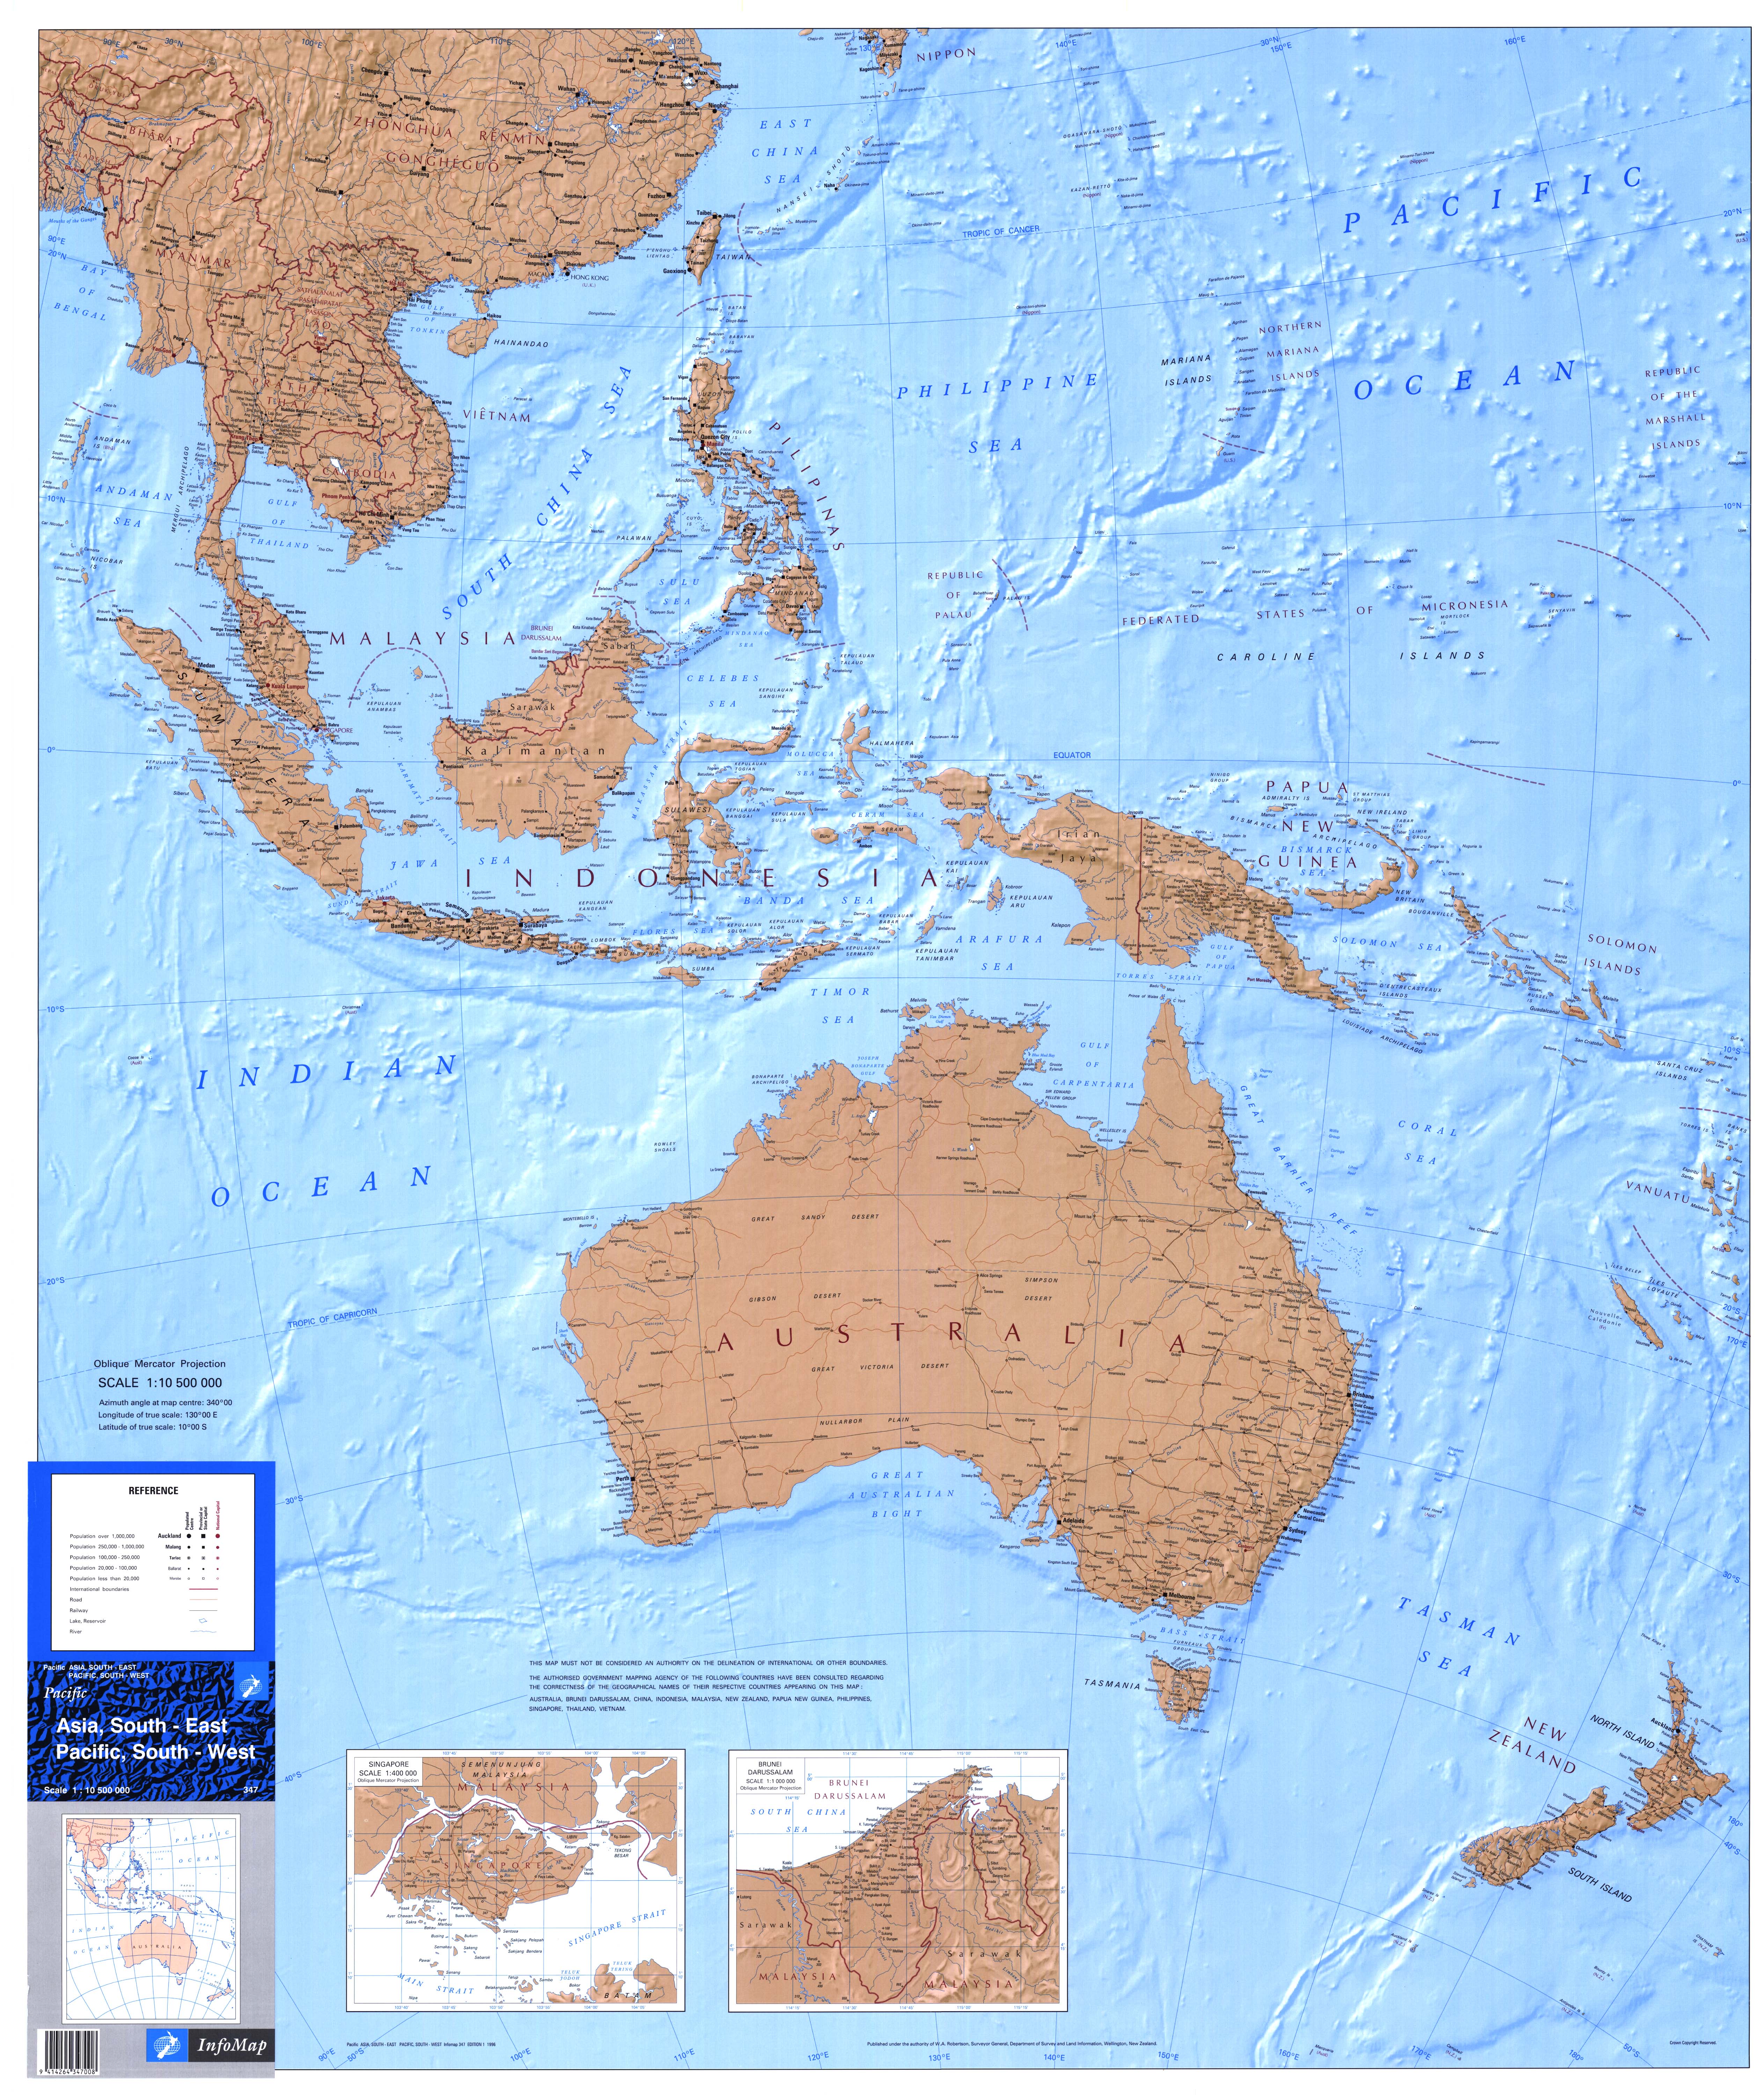 Typical map of Australia